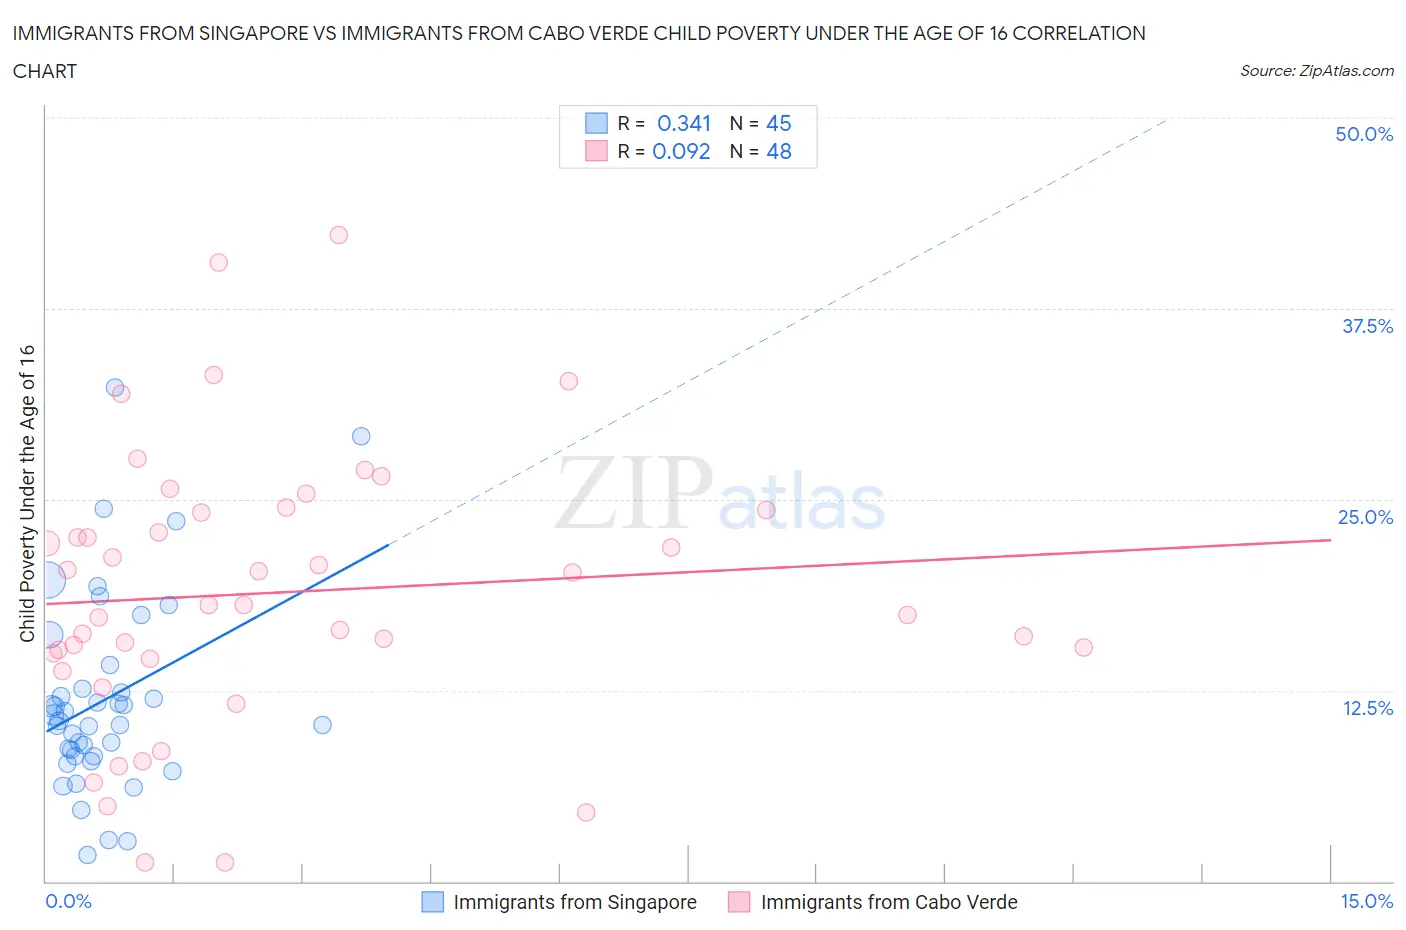 Immigrants from Singapore vs Immigrants from Cabo Verde Child Poverty Under the Age of 16